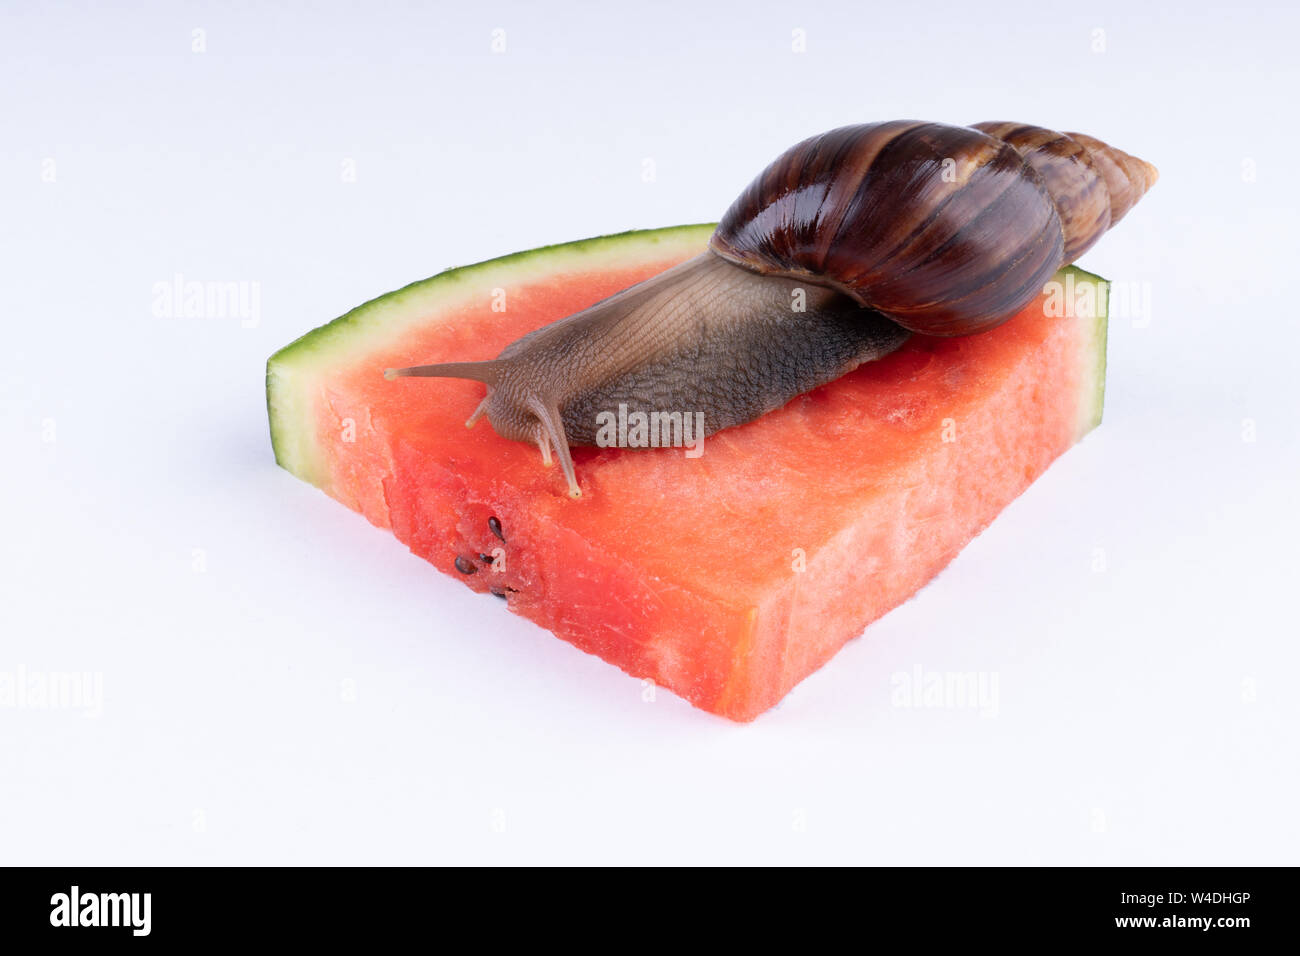 Giant African land snail Achatina fulica eating watermelon, on a white background, macro Stock Photo